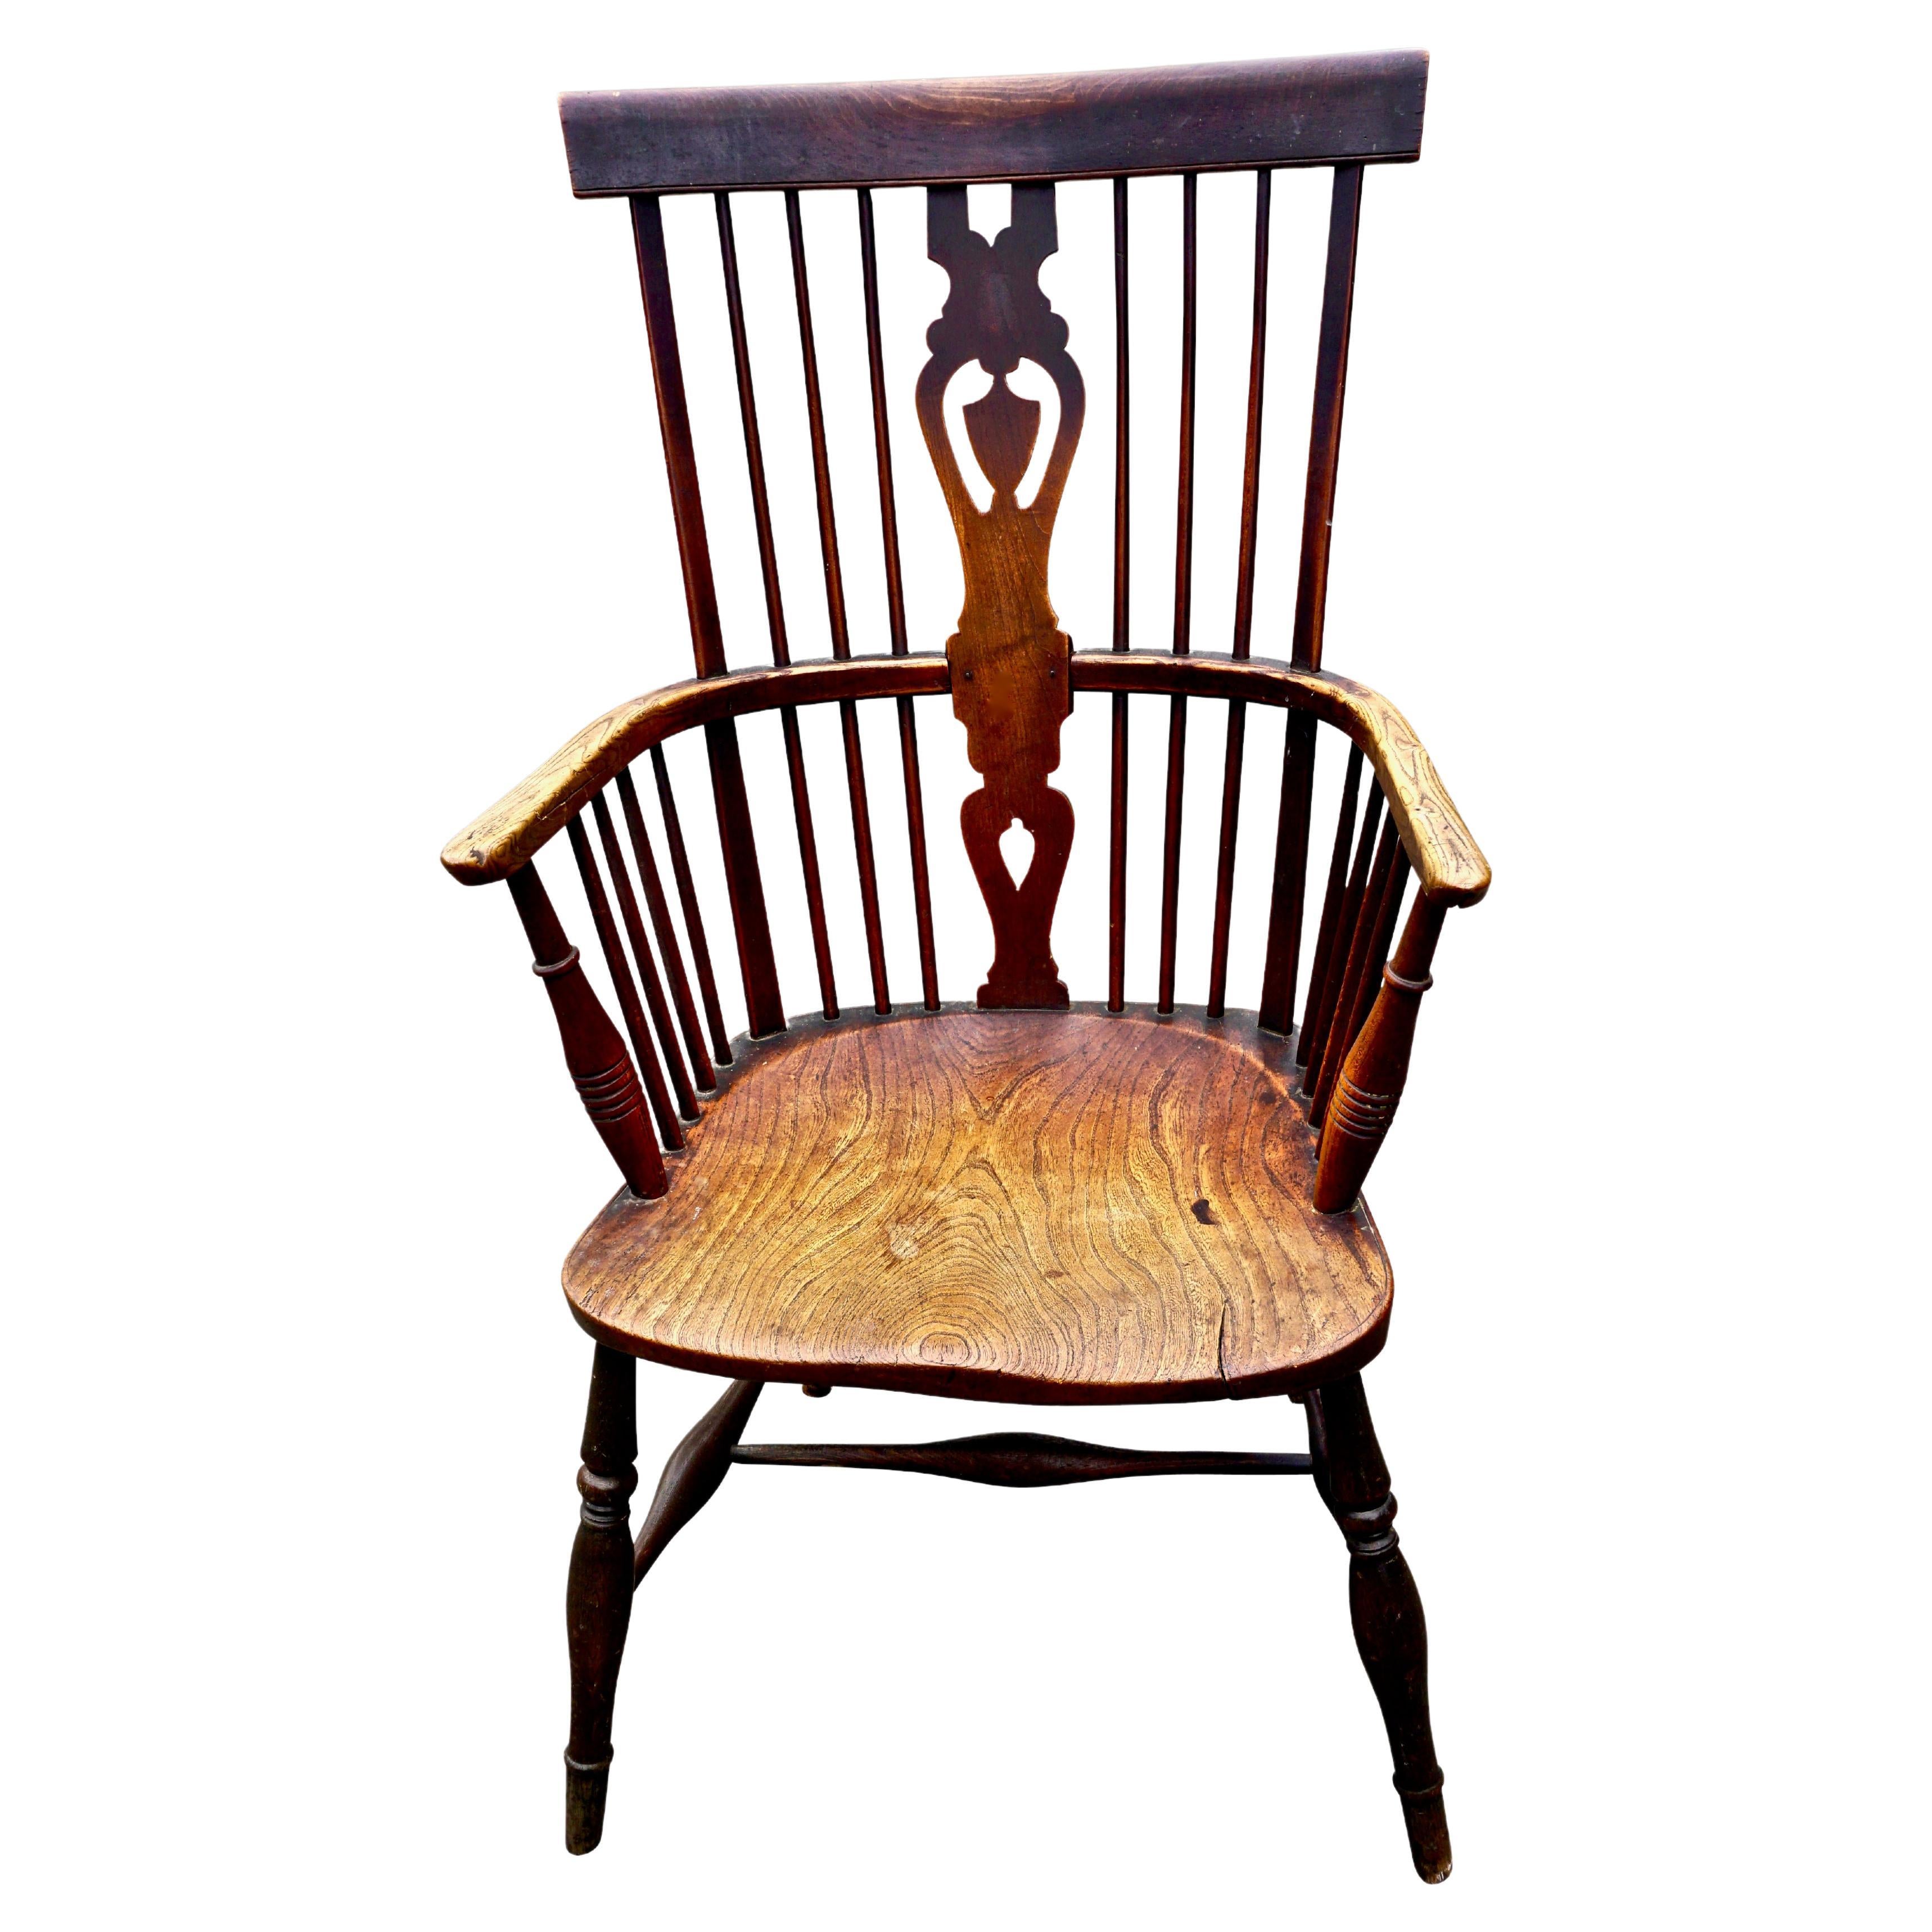 English Thames Valley Nineteenth Century Windsor Armchair with Hickory Seat